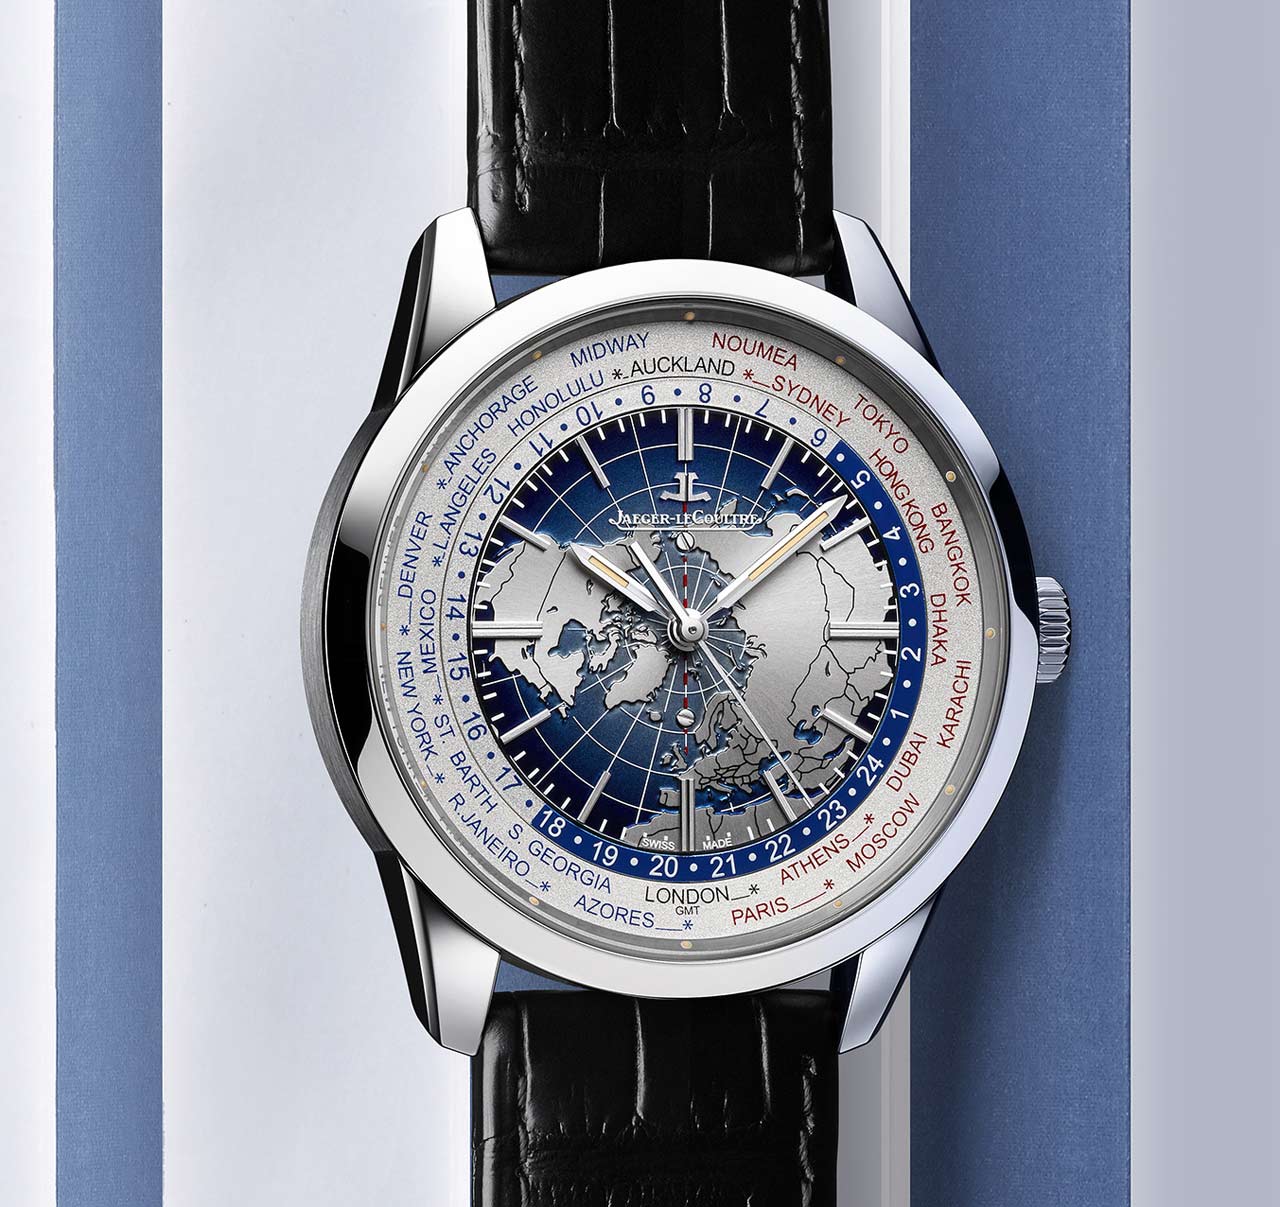 Jaeger-LeCoultre Geophysic Universal Time white gold version